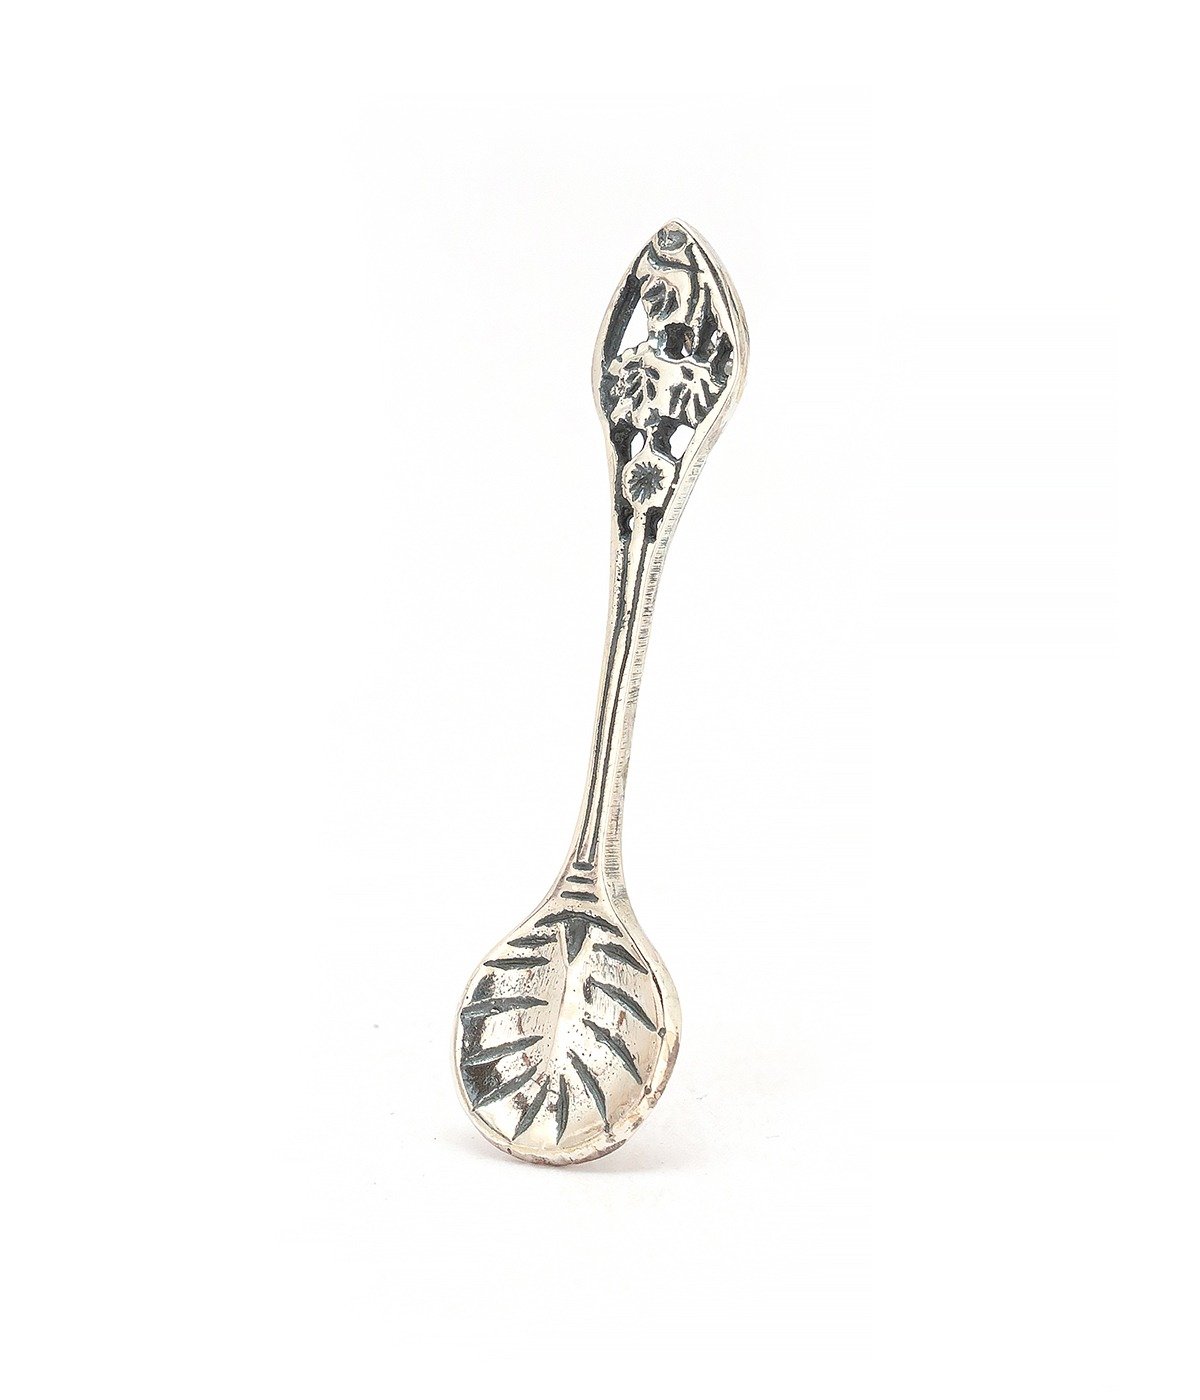 92.5 SILVER MINIATURE SPOON A CHEFS GIFT